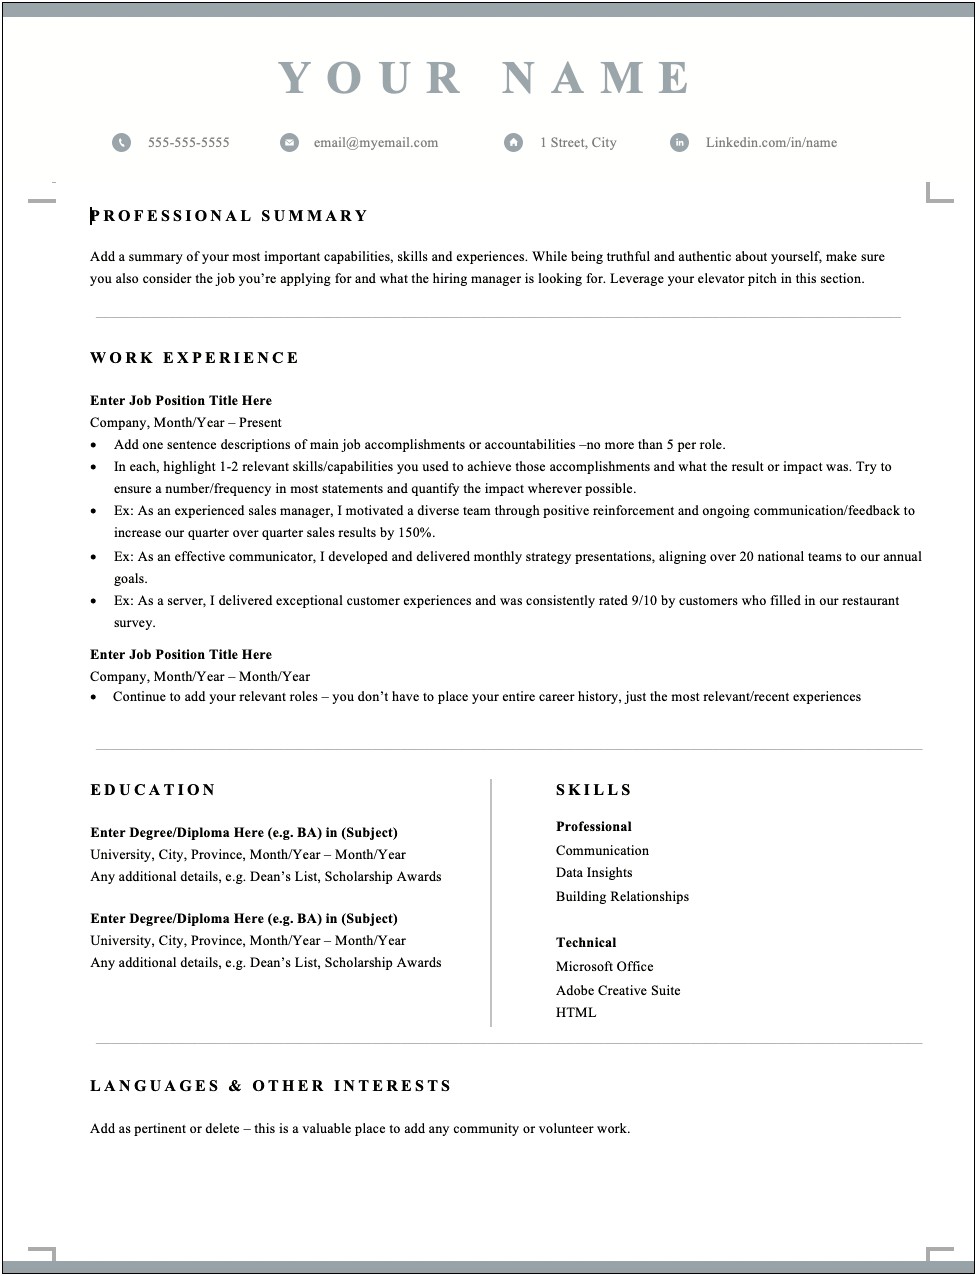 Resume Example Professional Synonym For Assciates Degree Standards